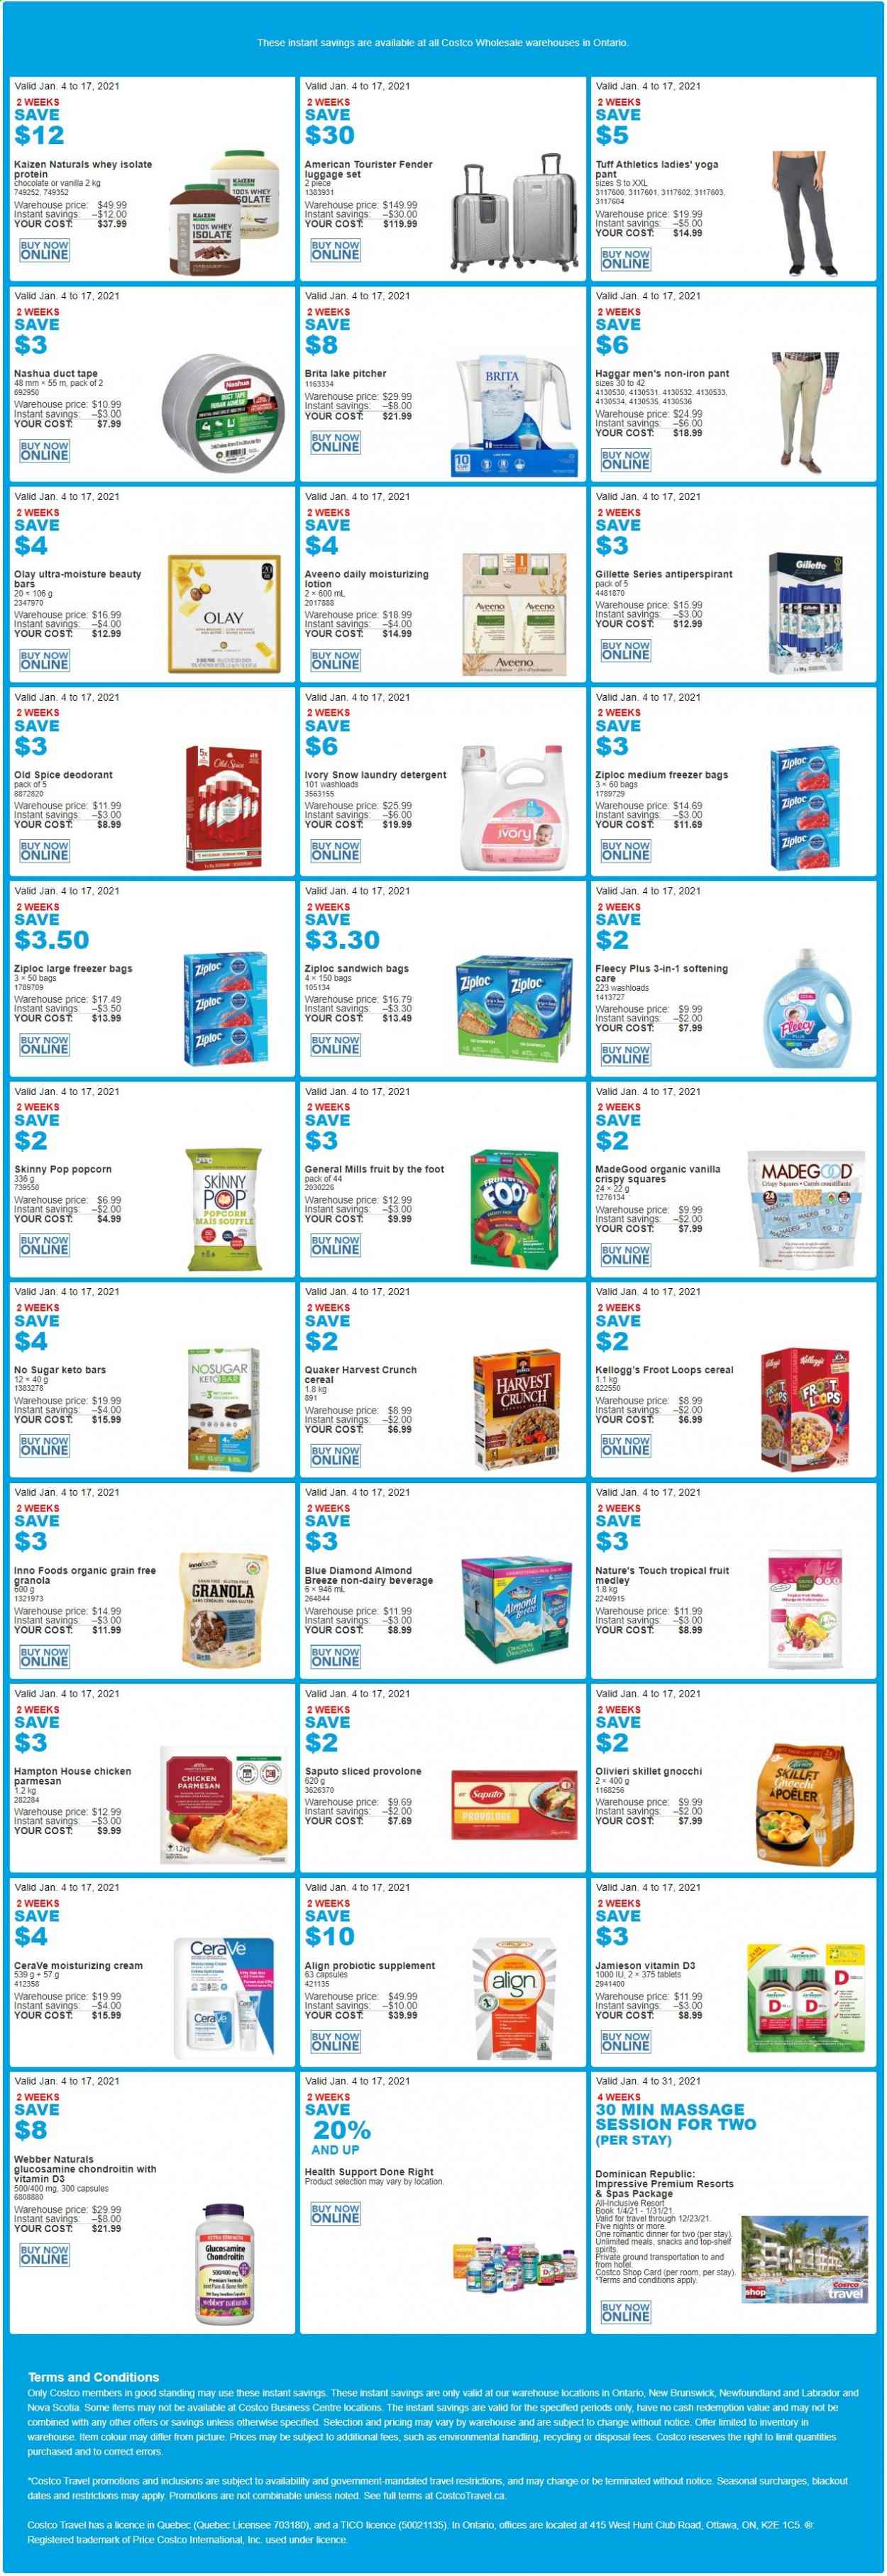 thumbnail - Costco Flyer - January 04, 2021 - January 17, 2021 - Sales products - Quaker, Provolone, Almond Breeze, chocolate, snack, Kellogg's, popcorn, Skinny Pop, cereals, spice, Blue Diamond, Aveeno, laundry detergent, CeraVe, Olay, body lotion, anti-perspirant, bag, Ziploc, pitcher, freezer bag, book, freezer, iron, luggage, luggage set, blackout, car battery, glucosamine, vitamin D3, Gillette, gnocchi, granola, Old Spice, deodorant. Page 1.